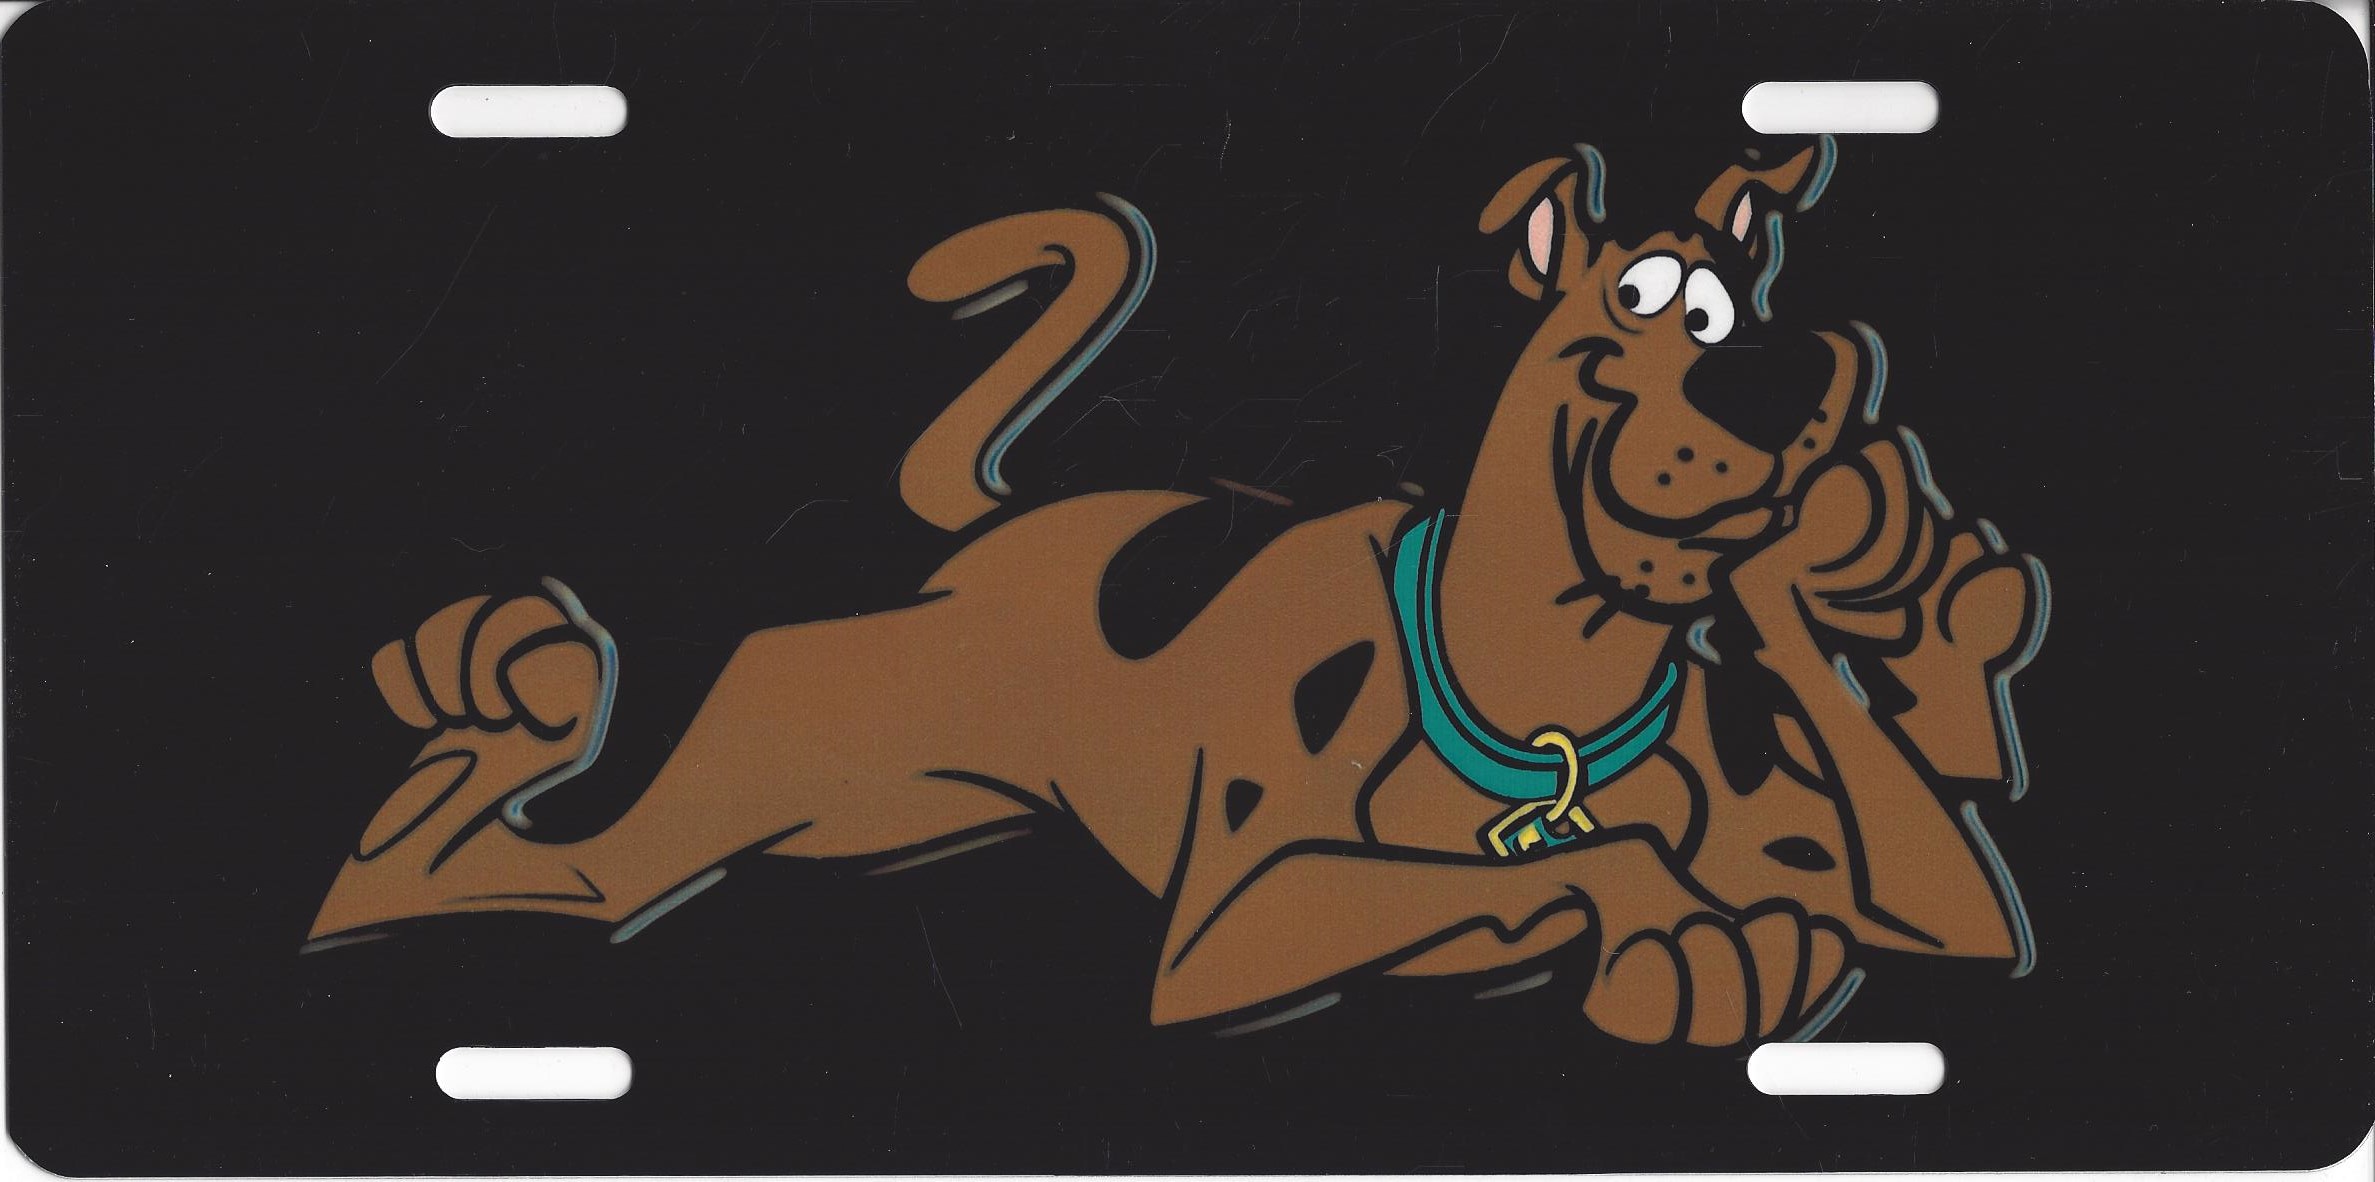 tv show logo license plate frame made in usa what would scooby doo 